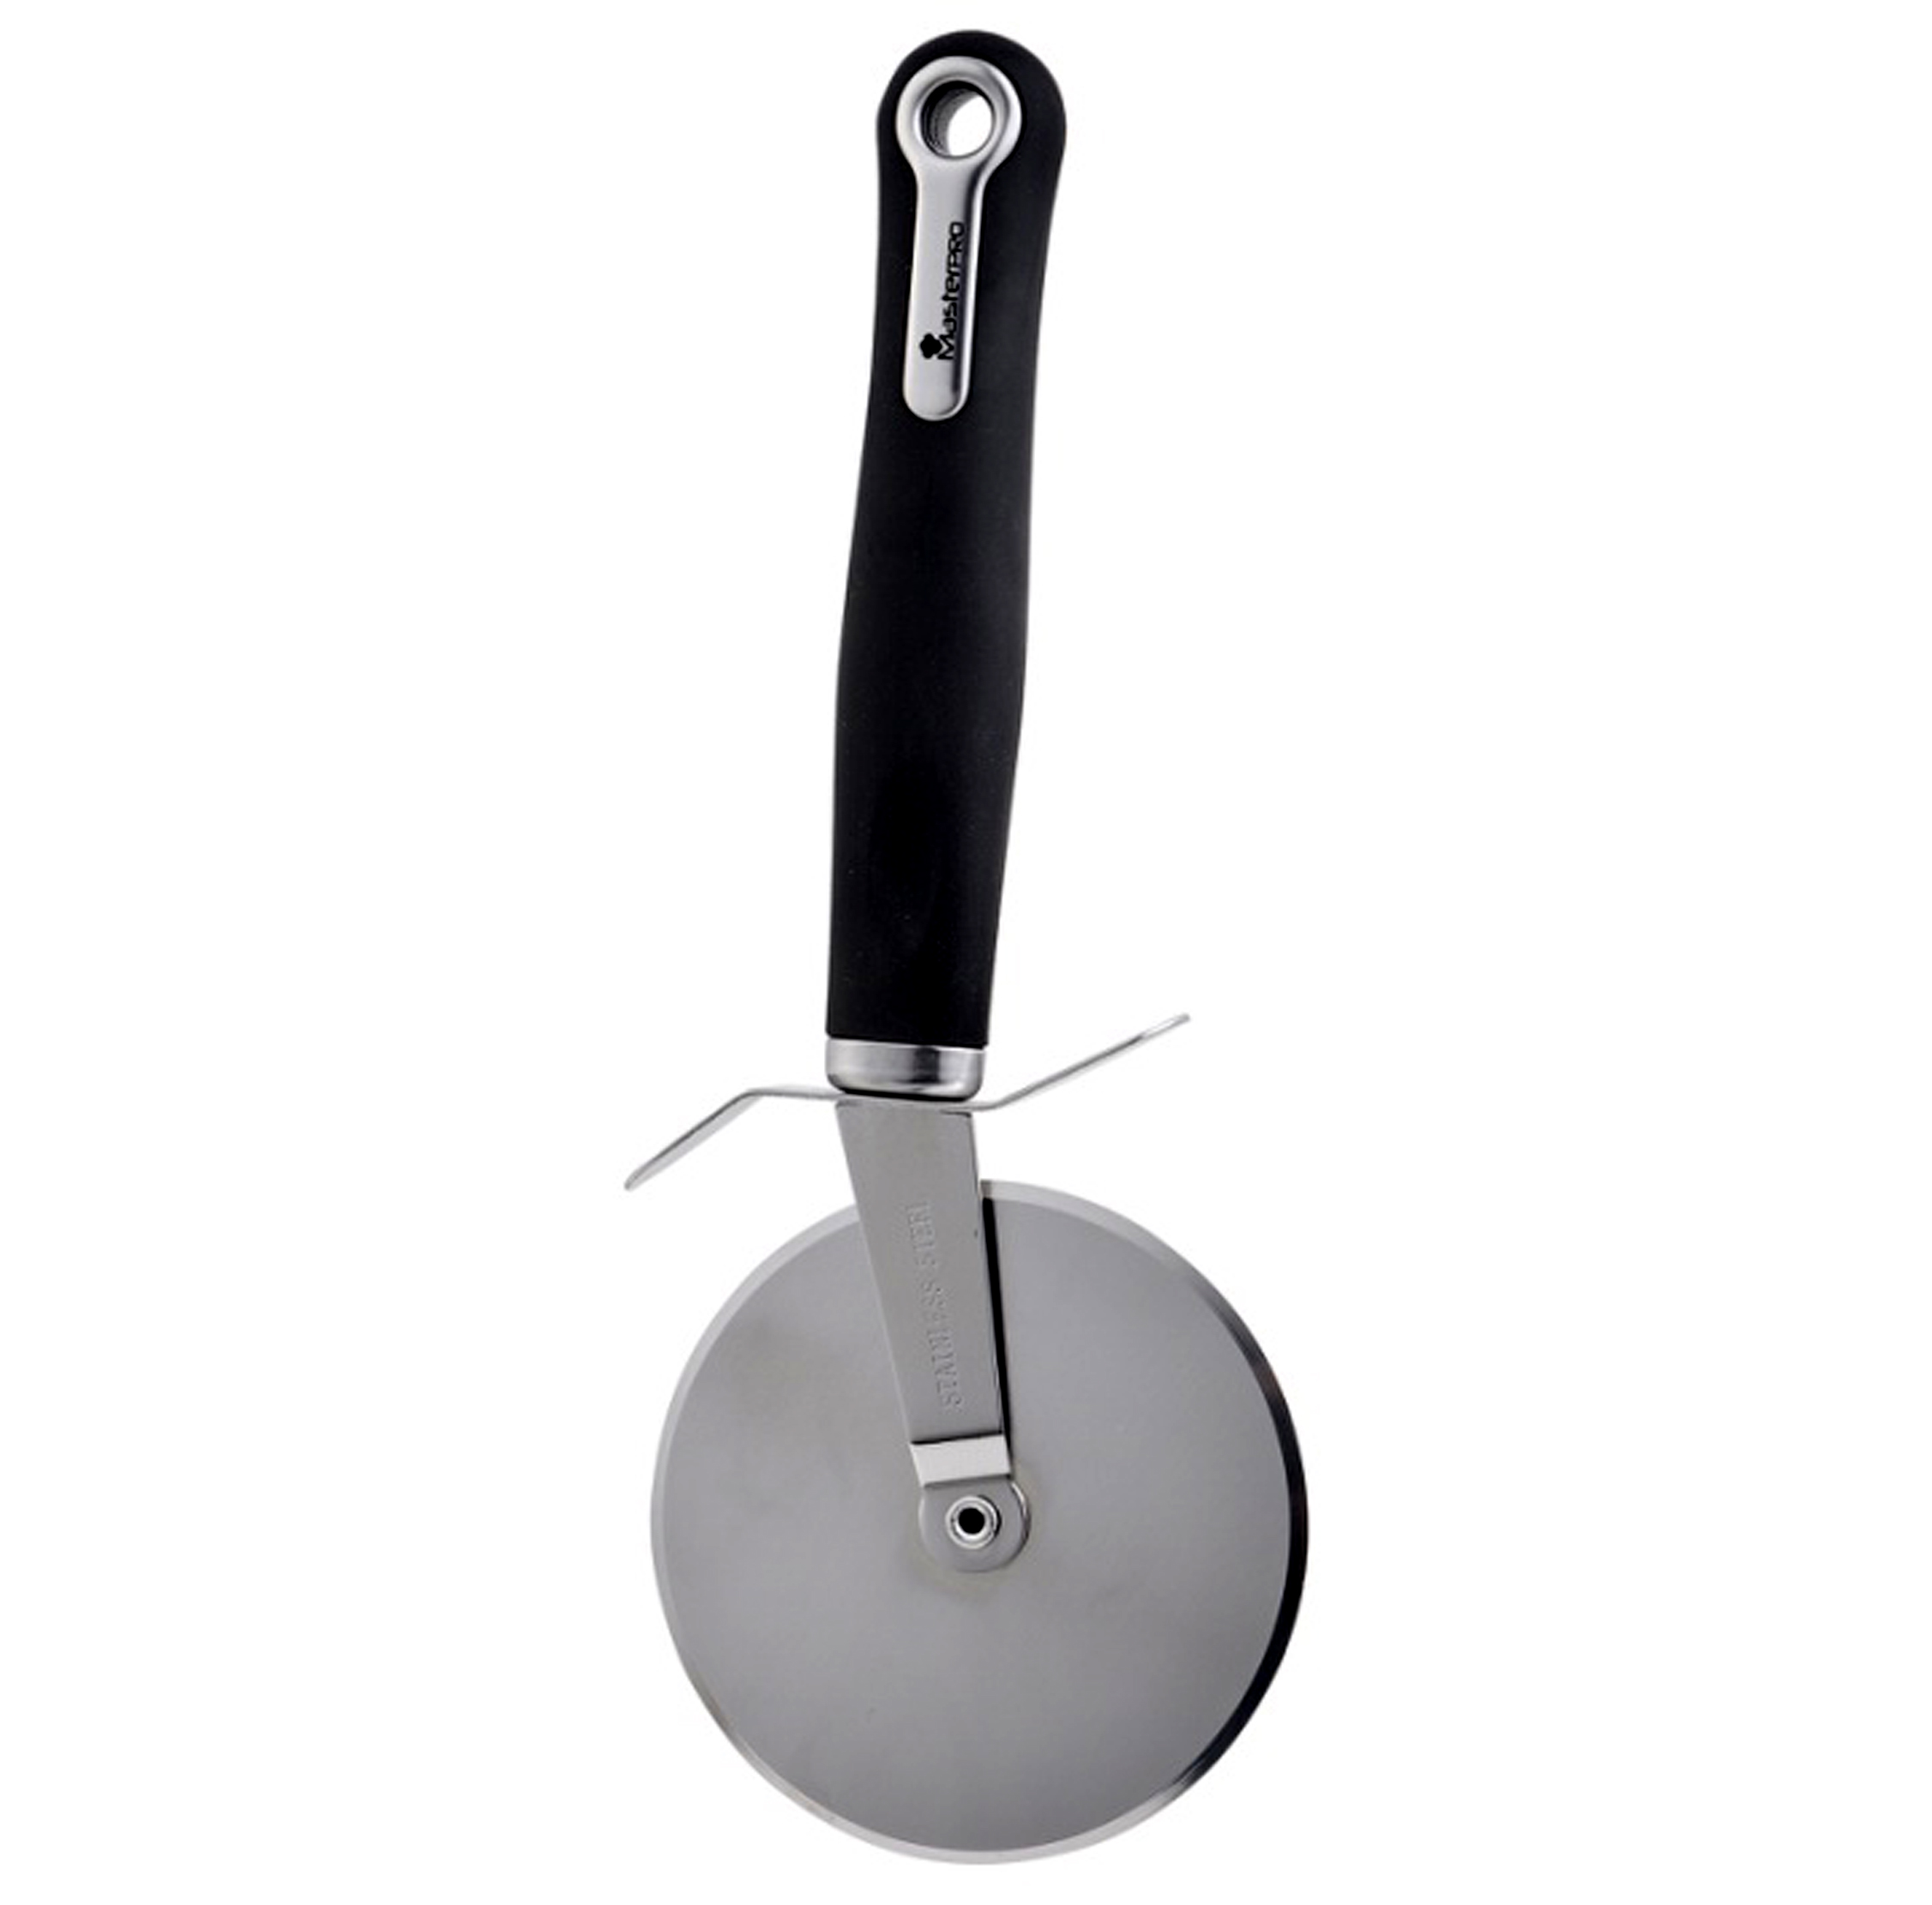 Bergner Stainless Steel Black Pizza Cutter Cycle For Kitchen